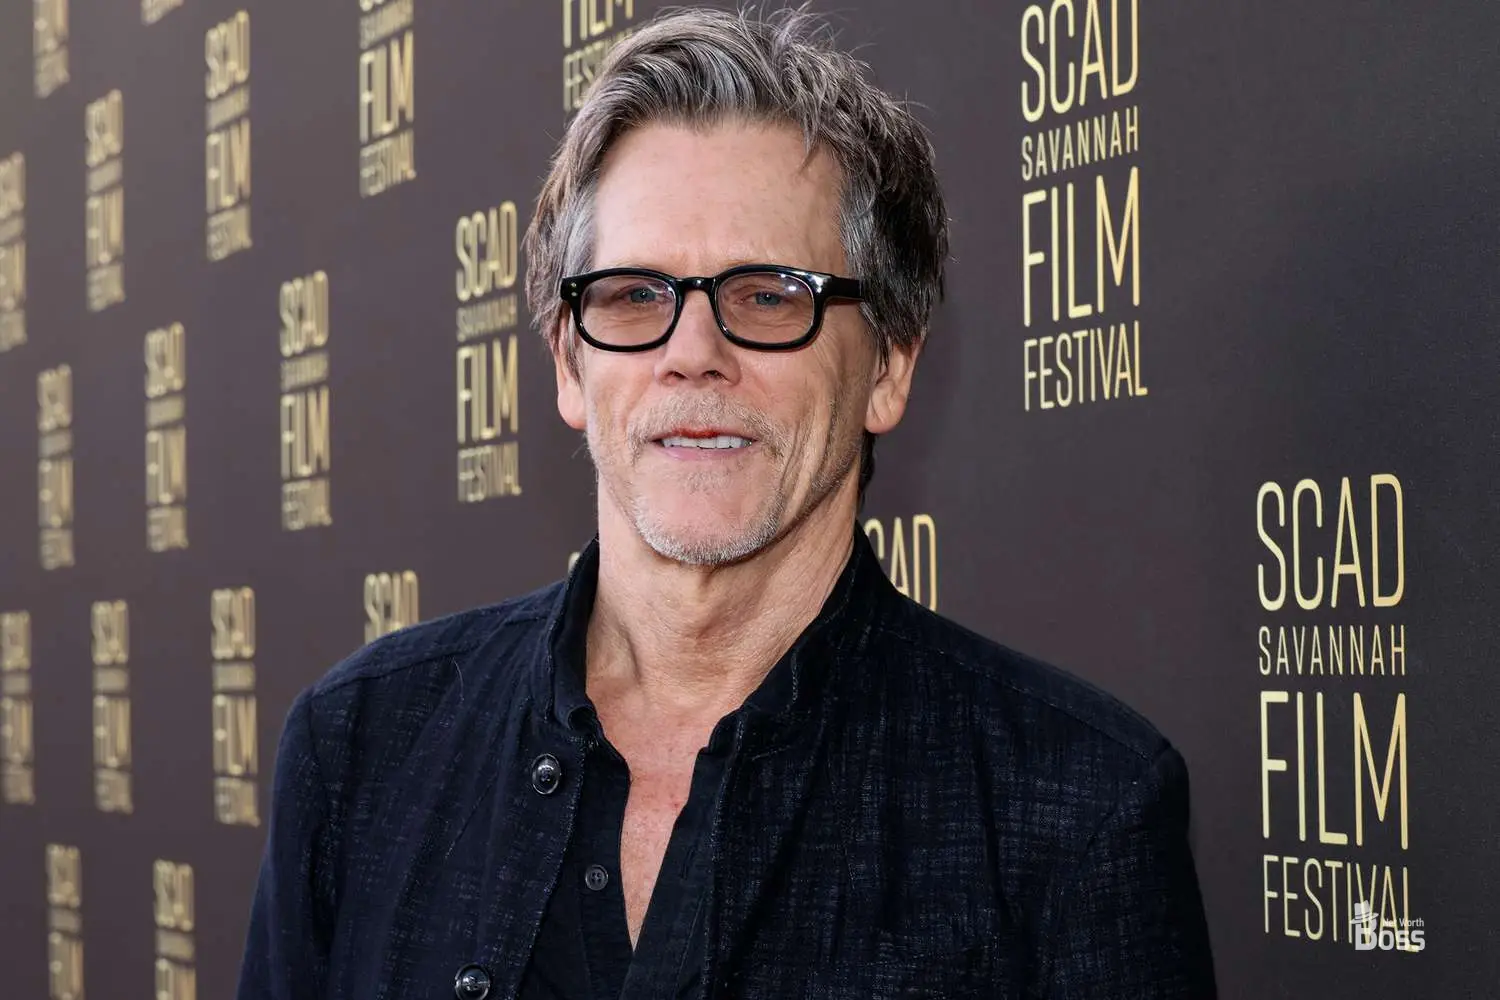 Kevin Bacon Net Worth